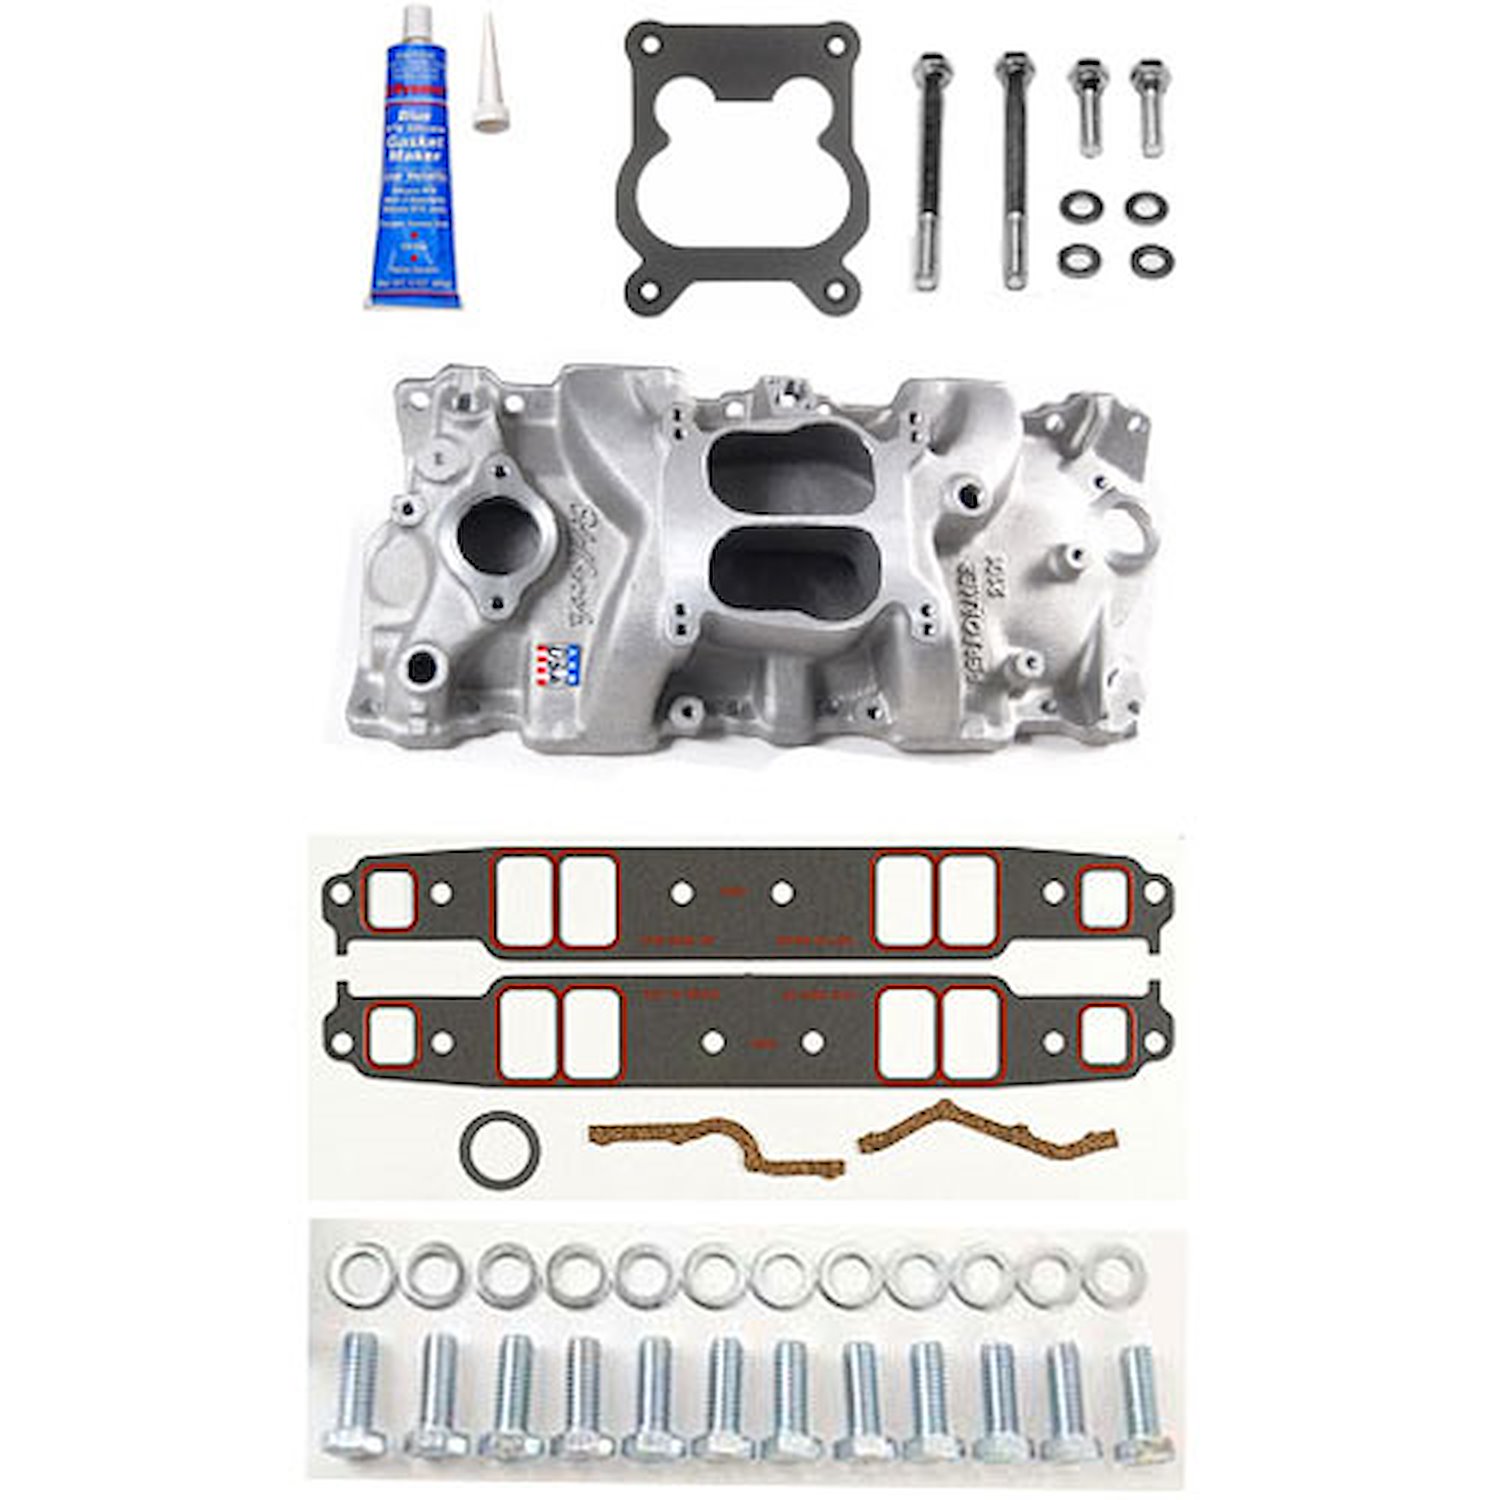 Performer Intake Manifold for Small Block Chevy with Installation Kit